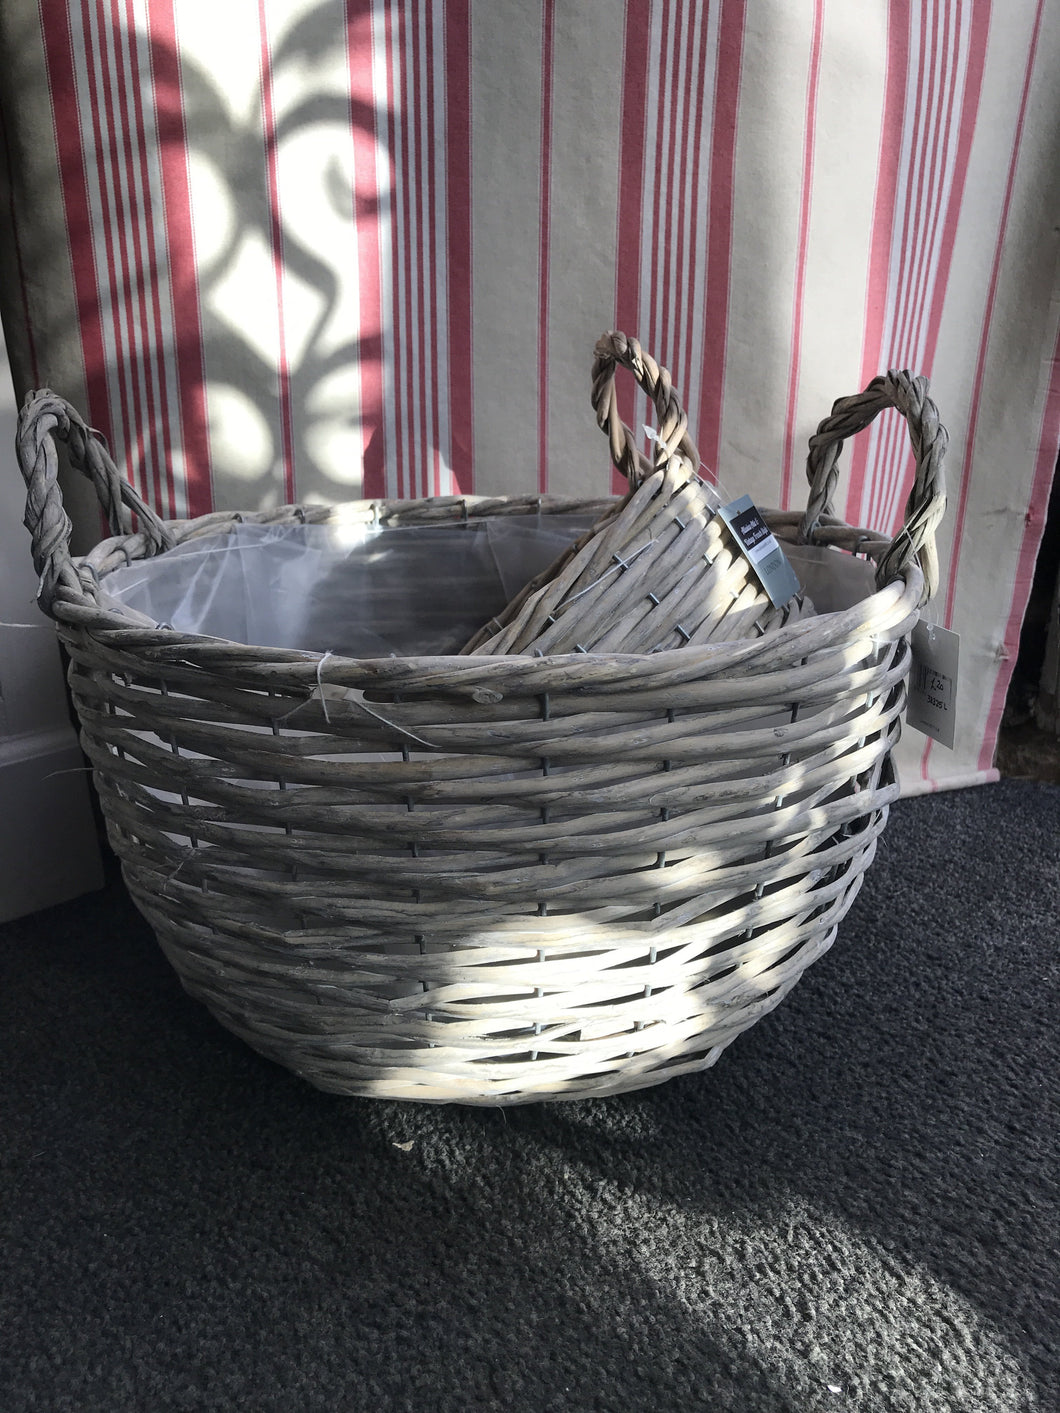 Baskets with Lining - Great Storage